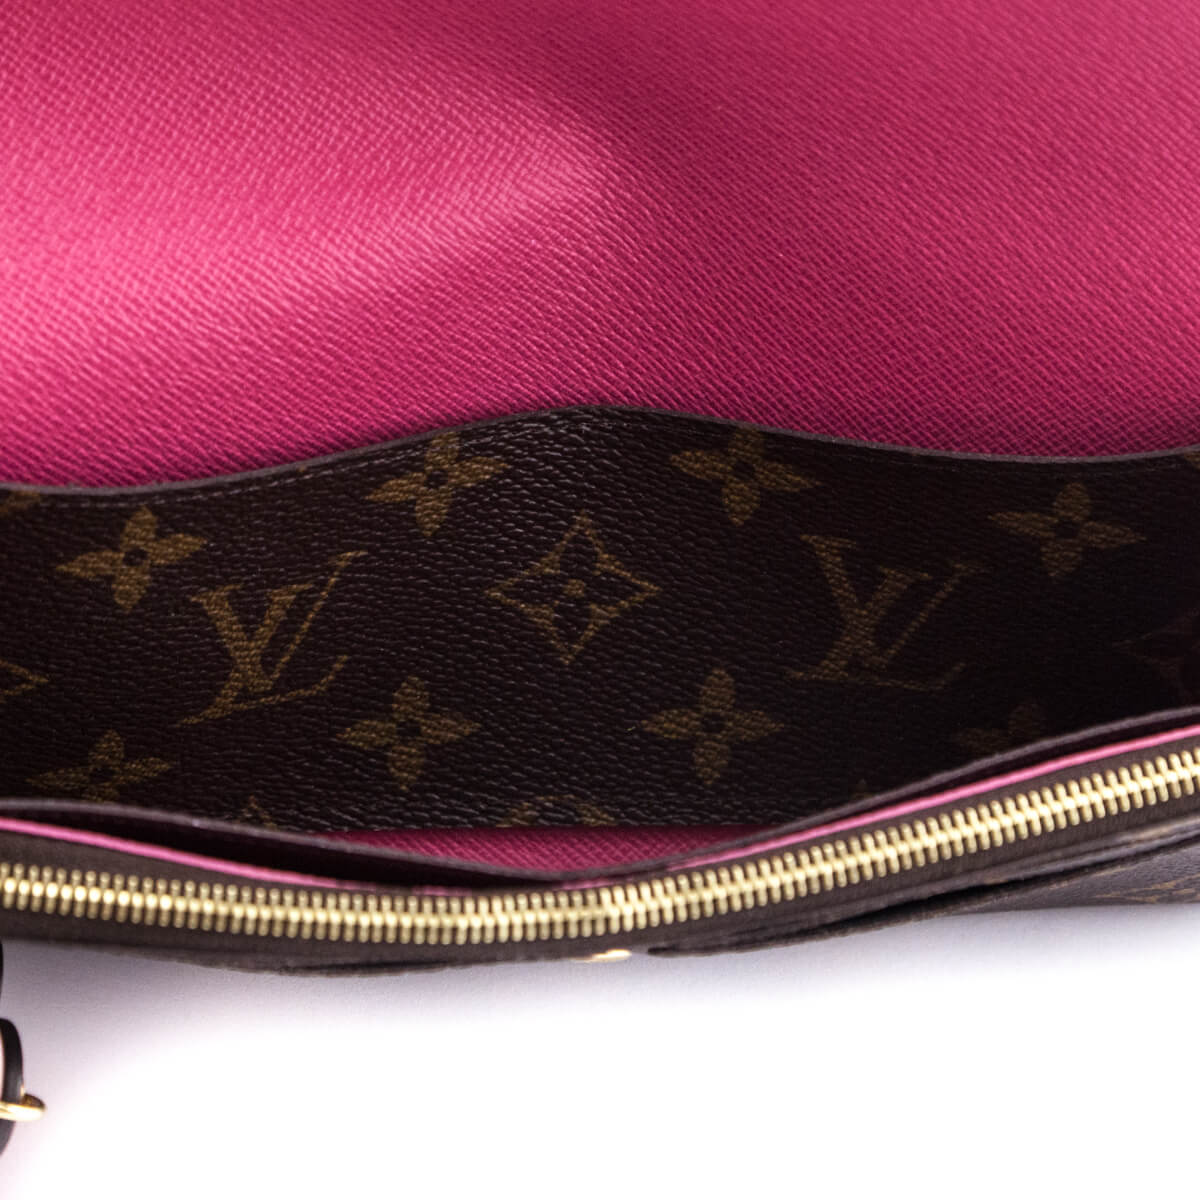 Louis Vuitton Emilie Wallet in Rose Ballerina Colour and Monogram Material